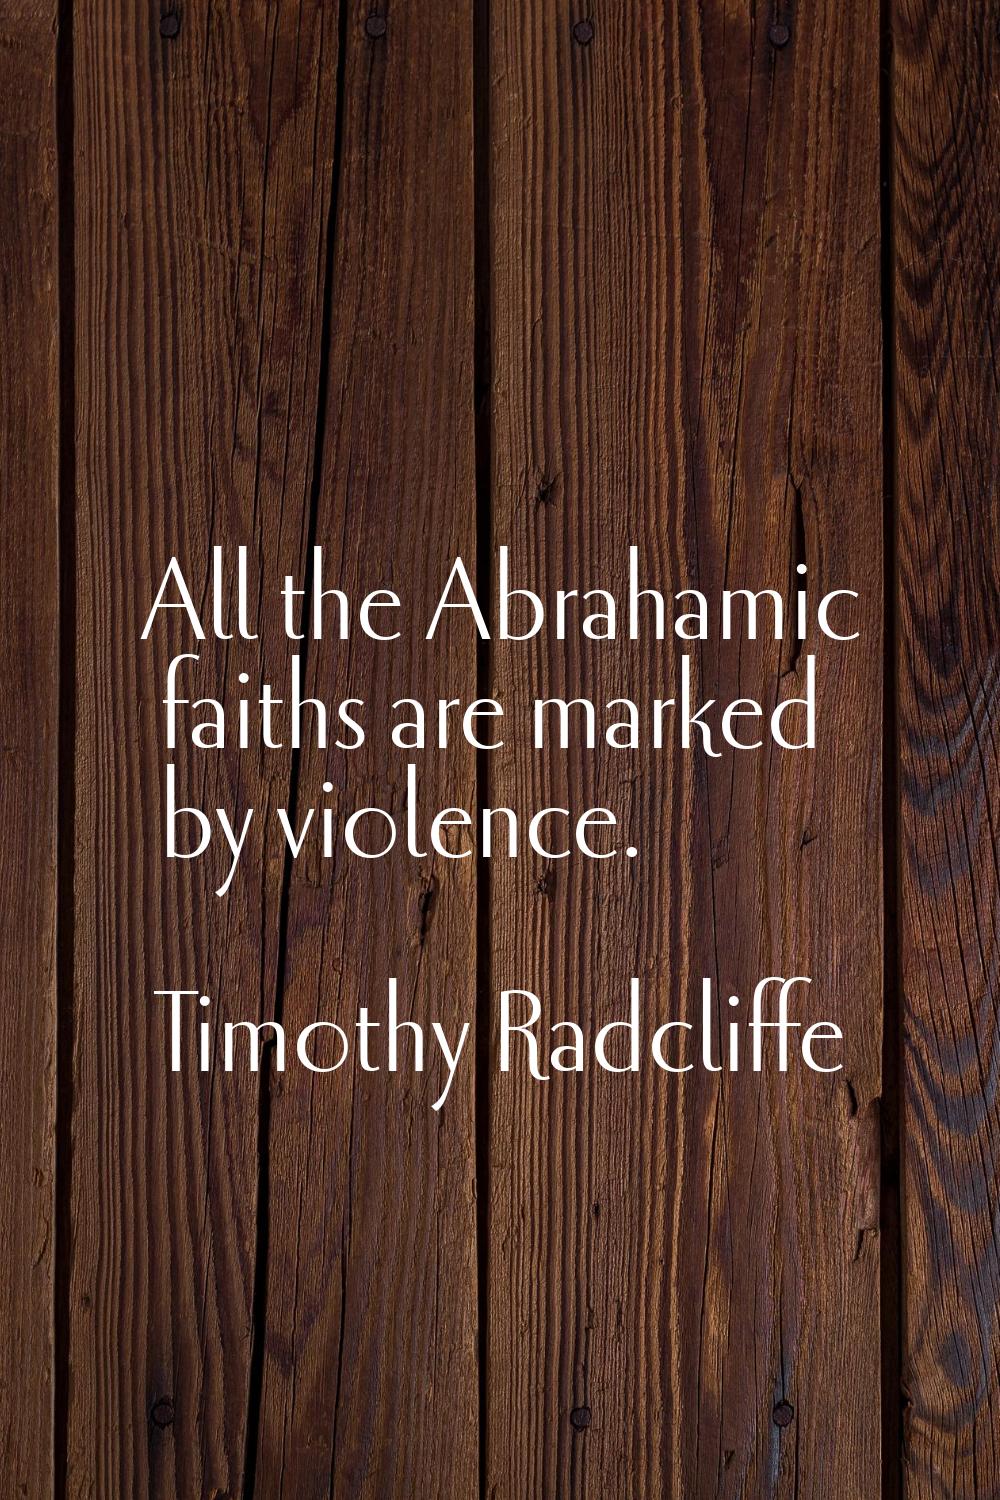 All the Abrahamic faiths are marked by violence.